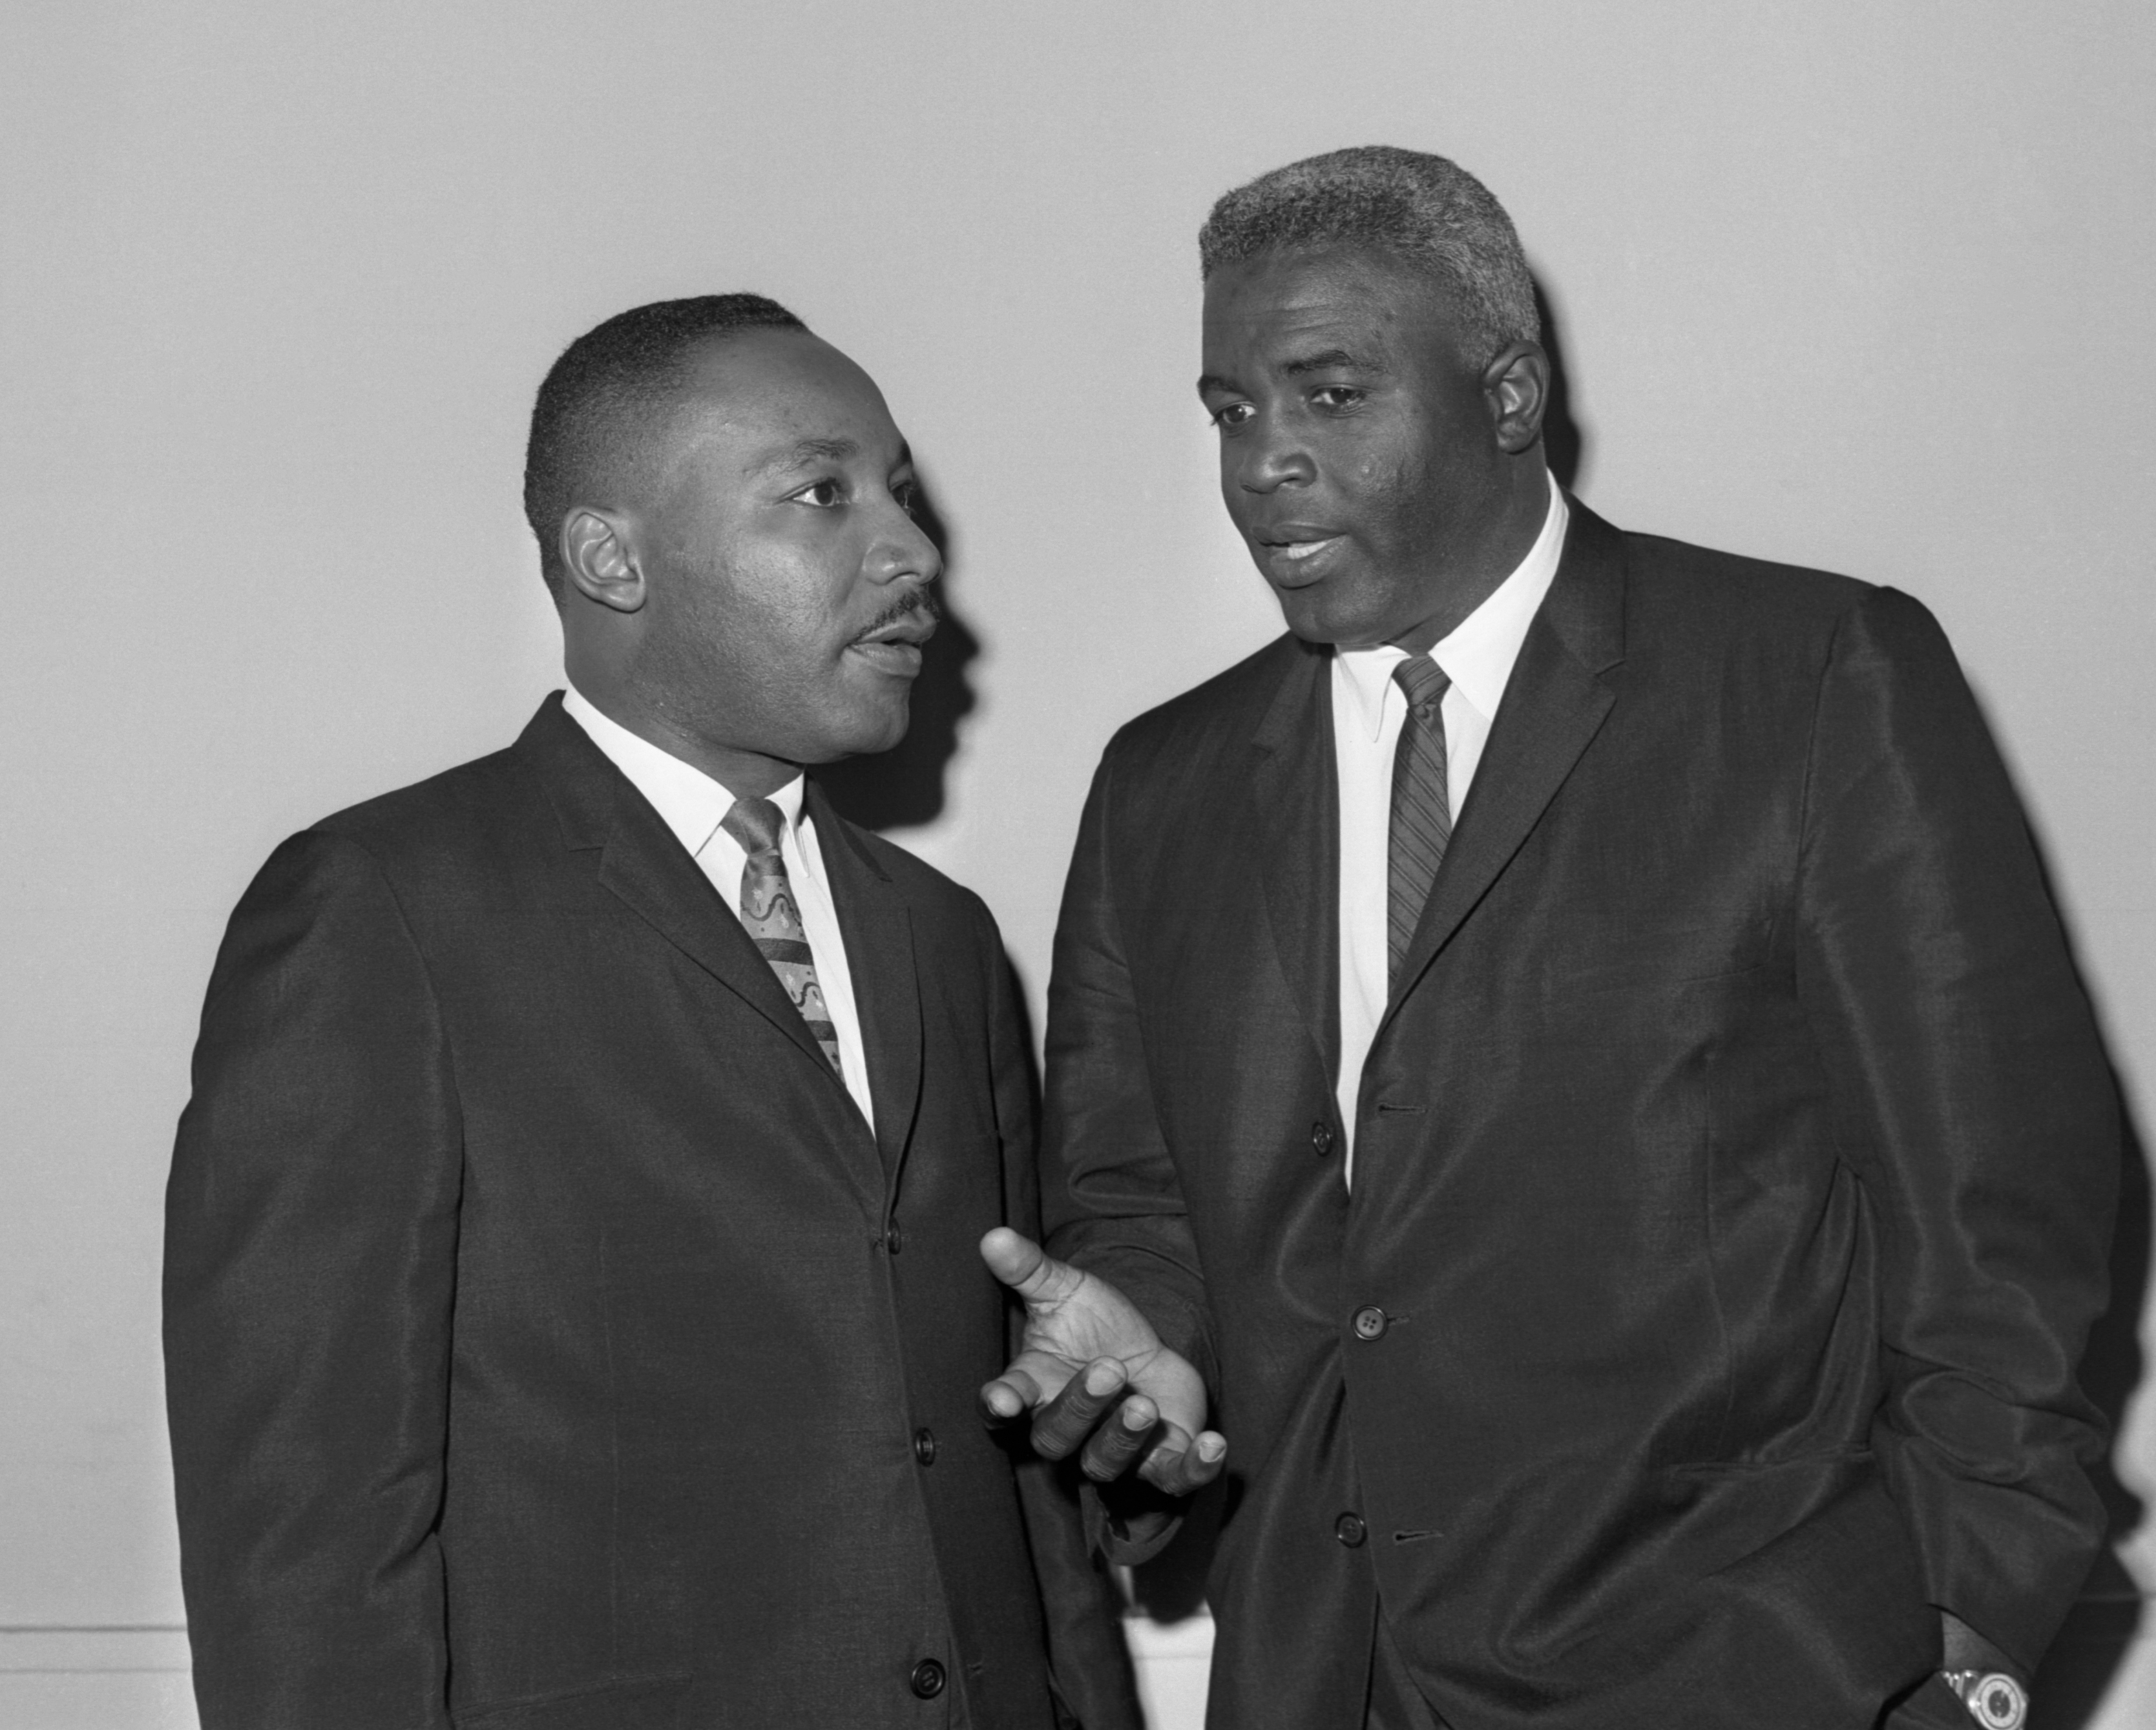 Jackie Robinson and the Rev. Dr. Martin Luther King talk before a press conference as part of their campaign against segregation in 1962.